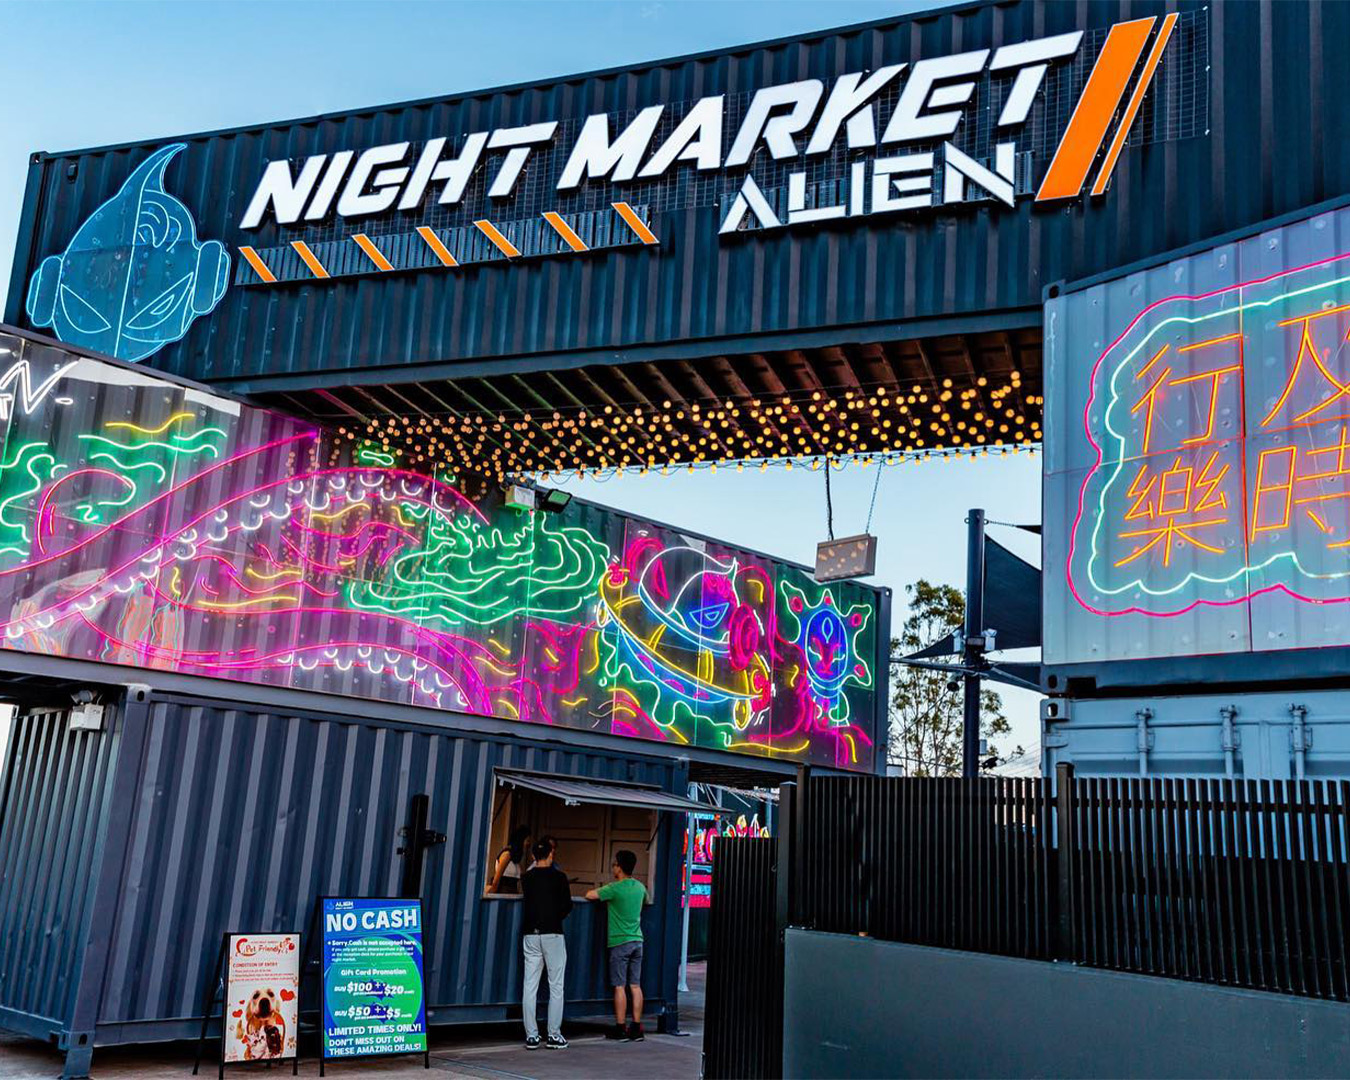 shipping containers marking the front entrance of alien night market brisbane